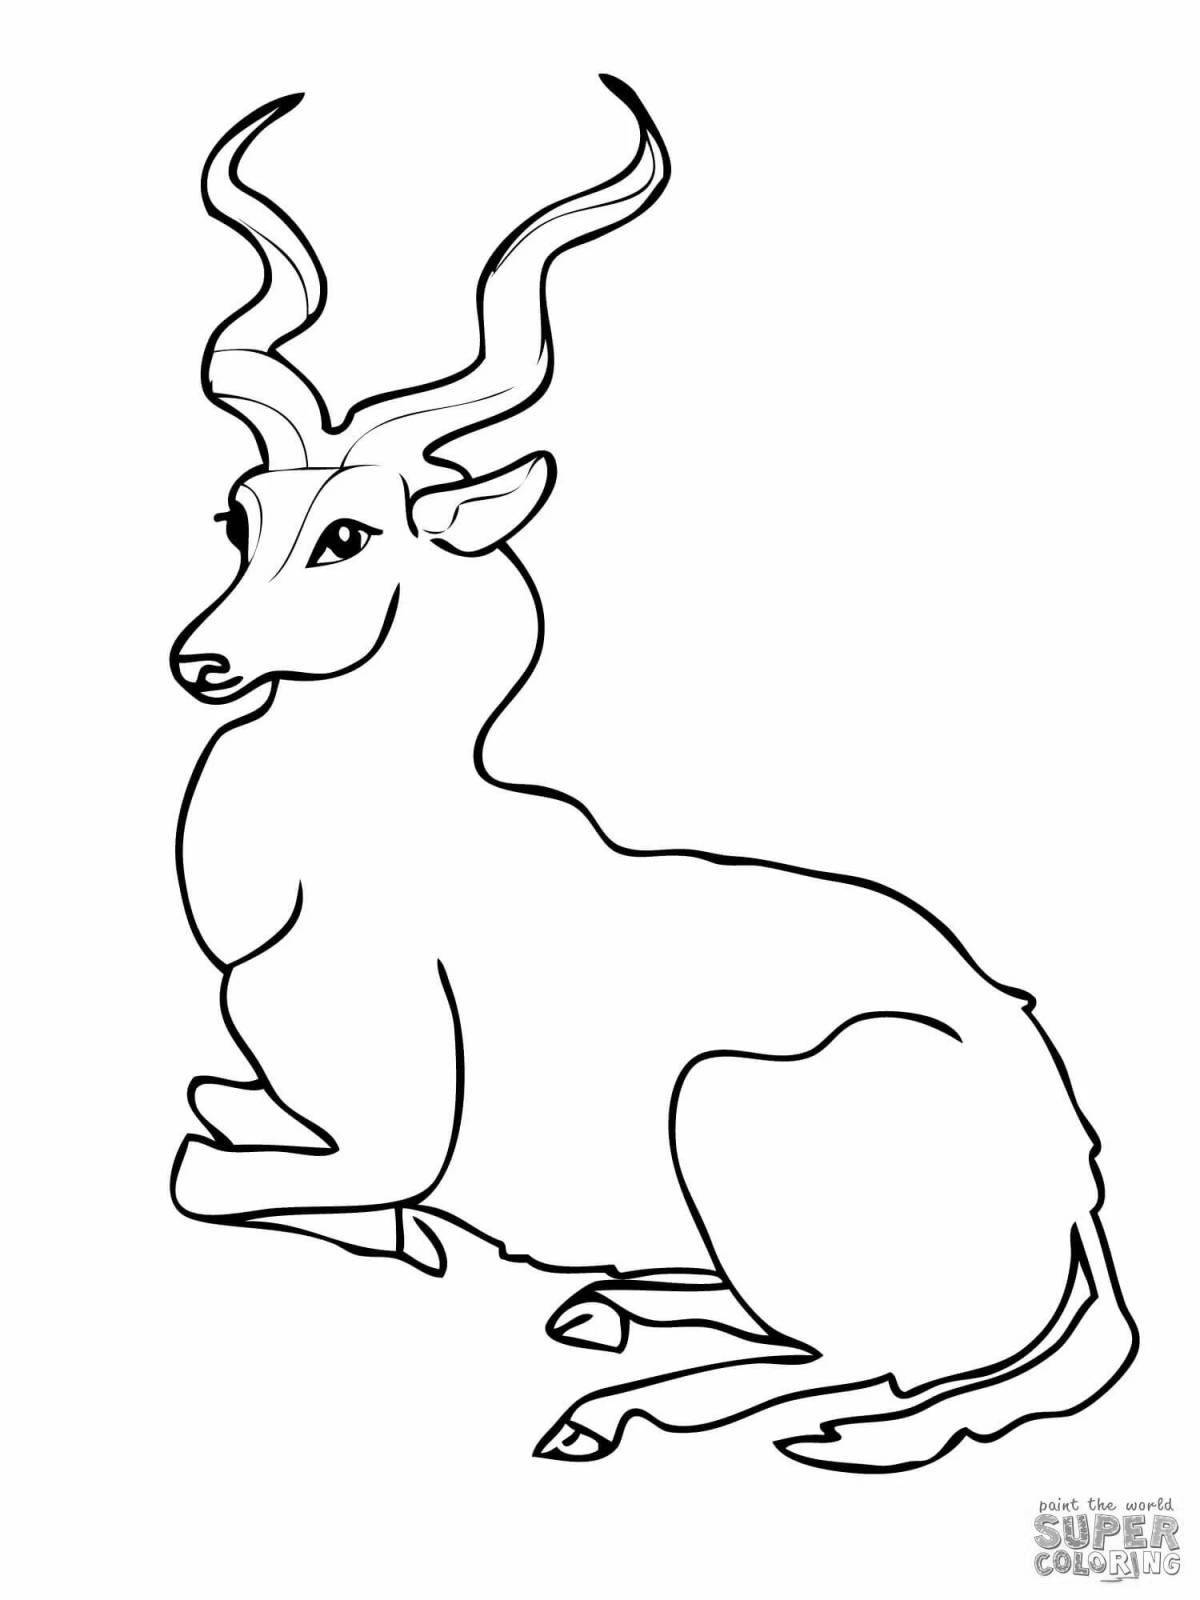 Great antelope coloring book for kids